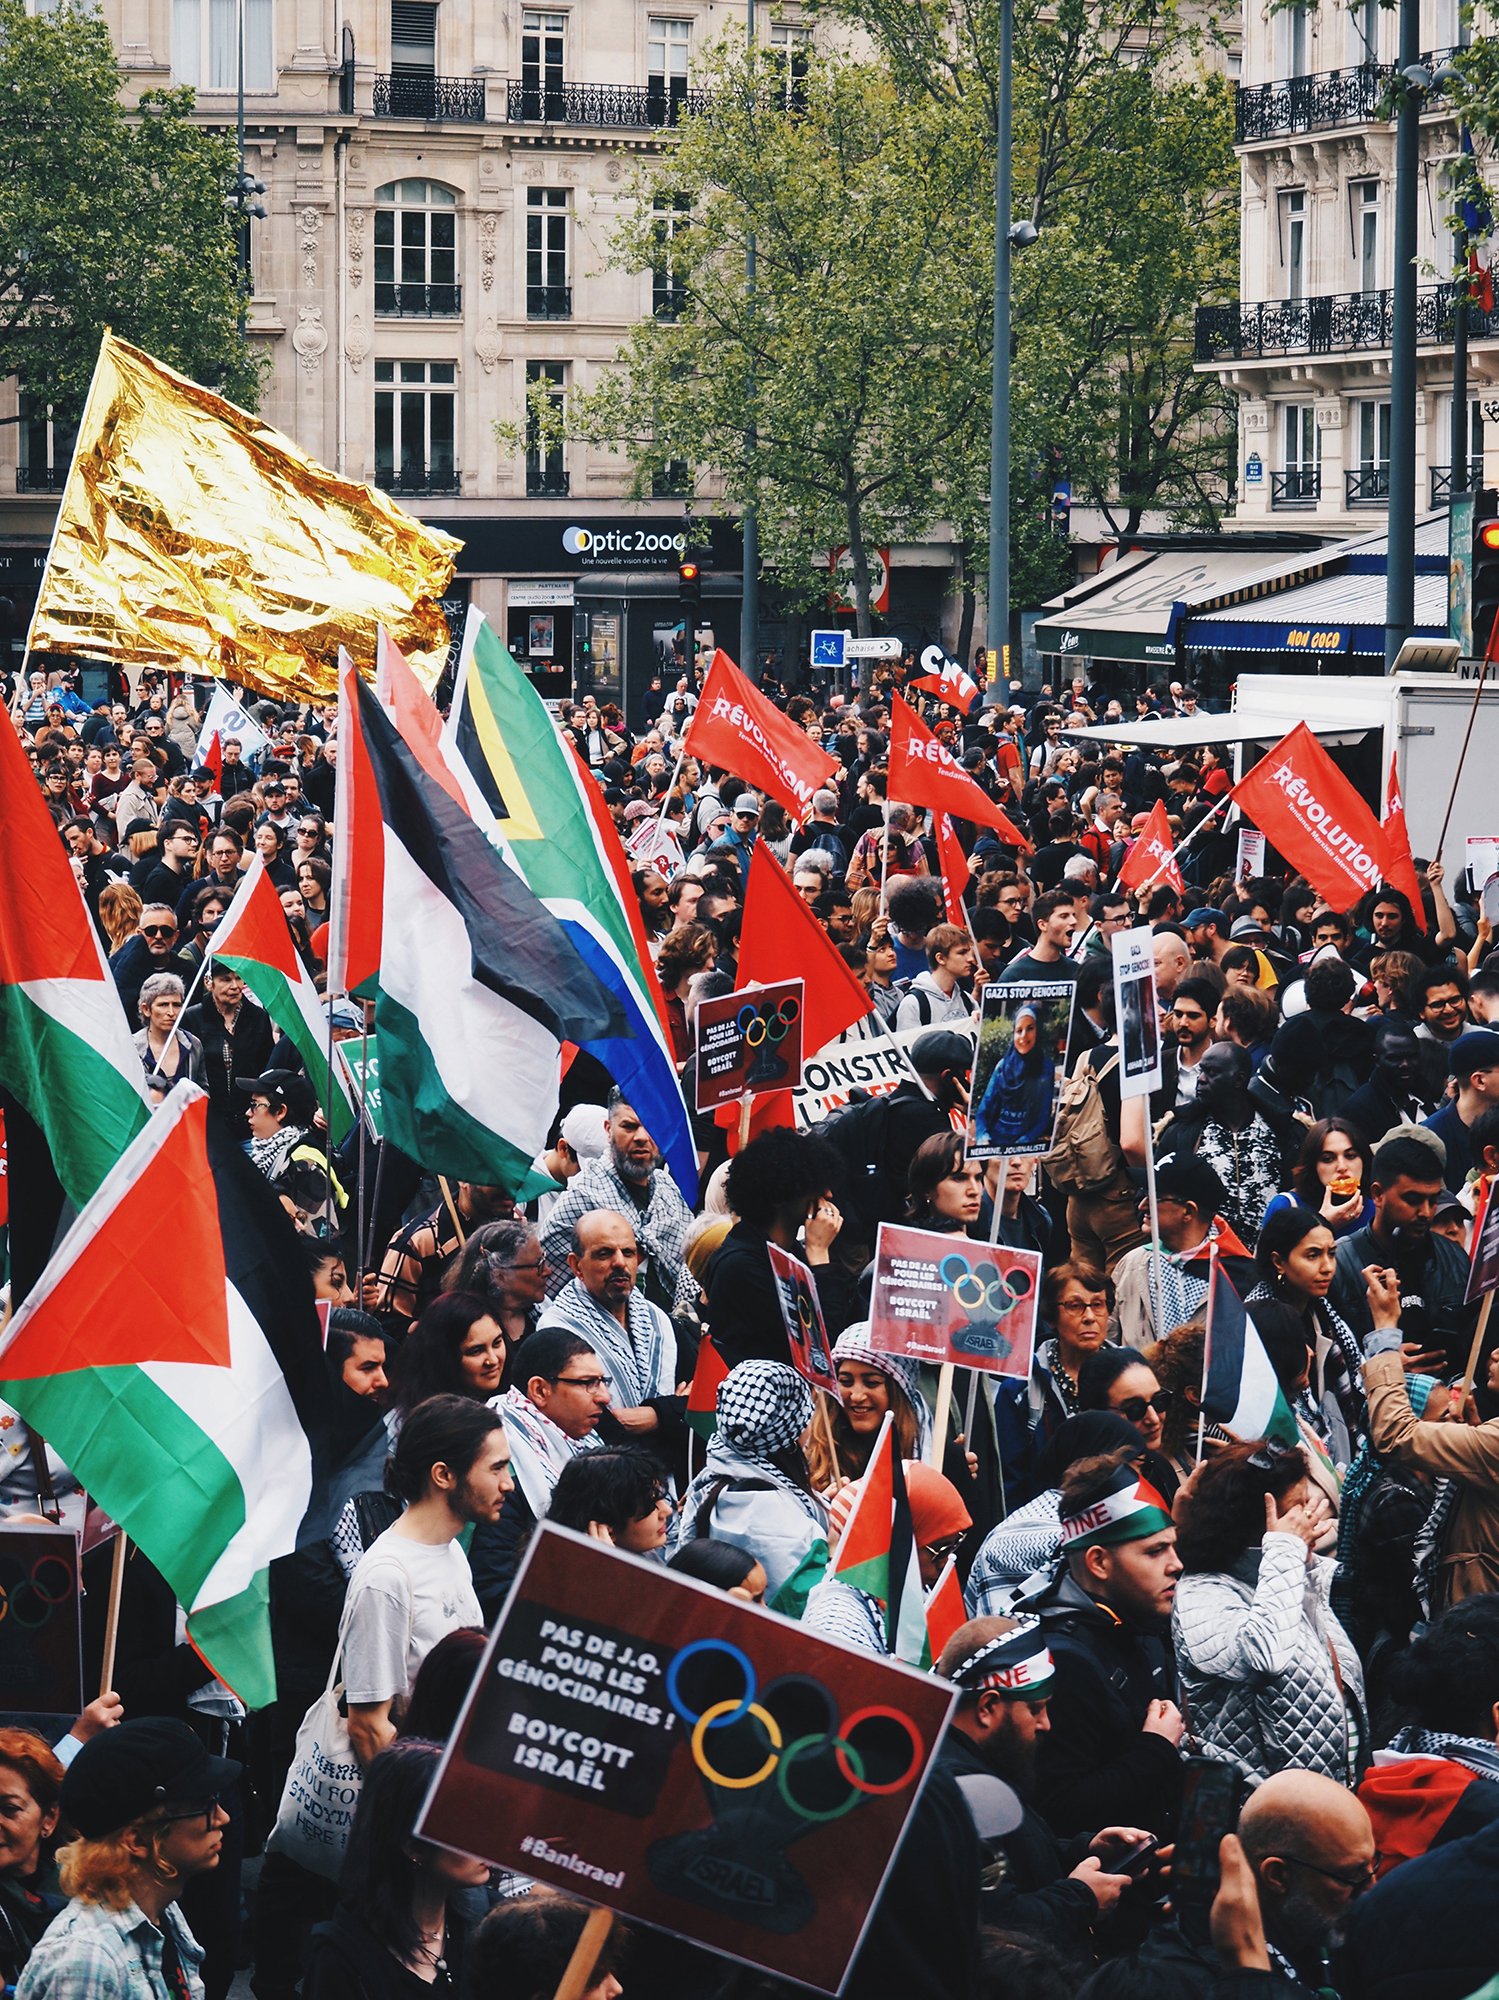 People hold Palestinian flags, "Revolution" flags, and banners against Olympics on Mayday demonstration in Paris.